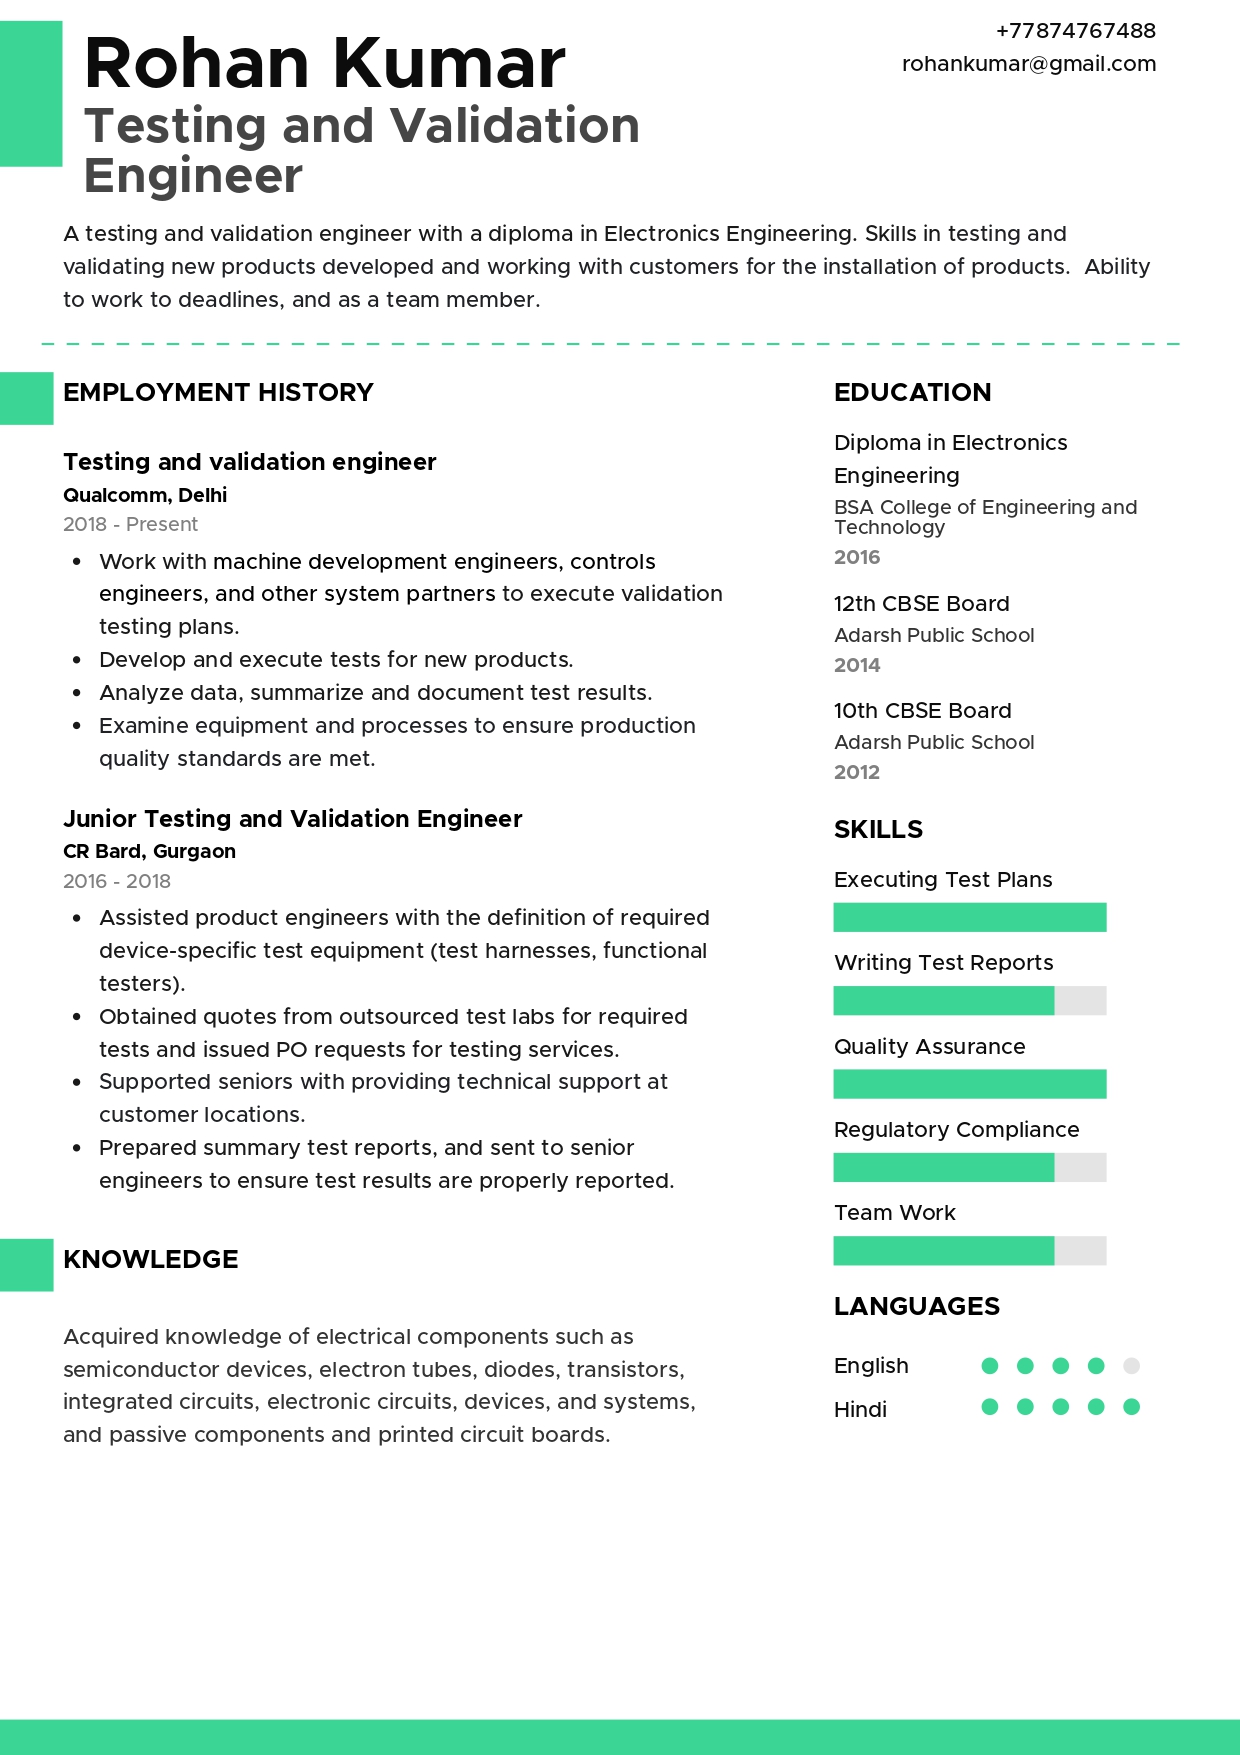 Sample Resume of Testing and Validation Engineer | Free Resume Templates & Samples on Resumod.co